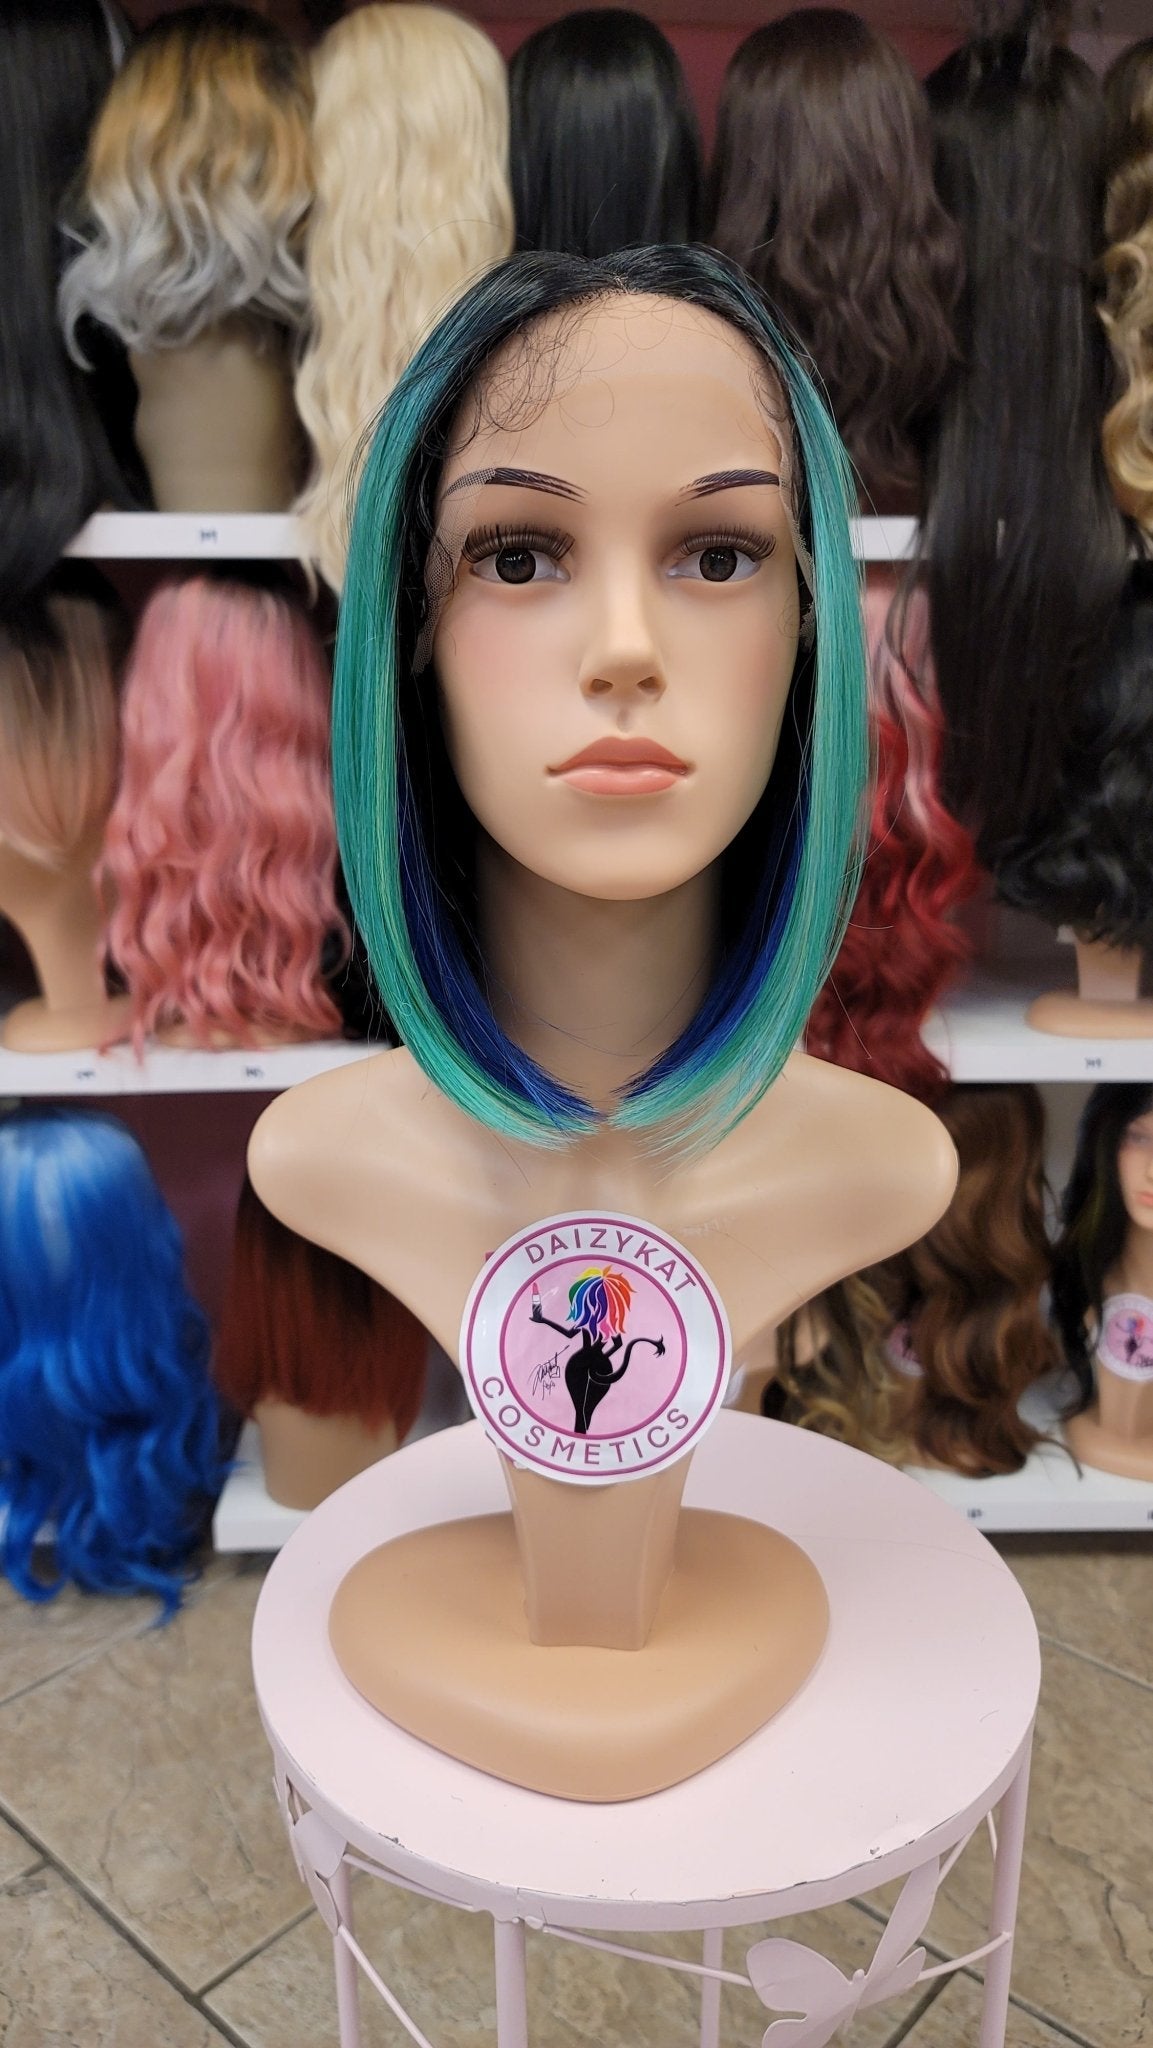 263 CHA CHA - Middle Part Lace Front Wig - 1B/BLU/GRN - DaizyKat Cosmetics 263 CHA CHA - Middle Part Lace Front Wig - 1B/BLU/GRN DaizyKat Cosmetics Wigs